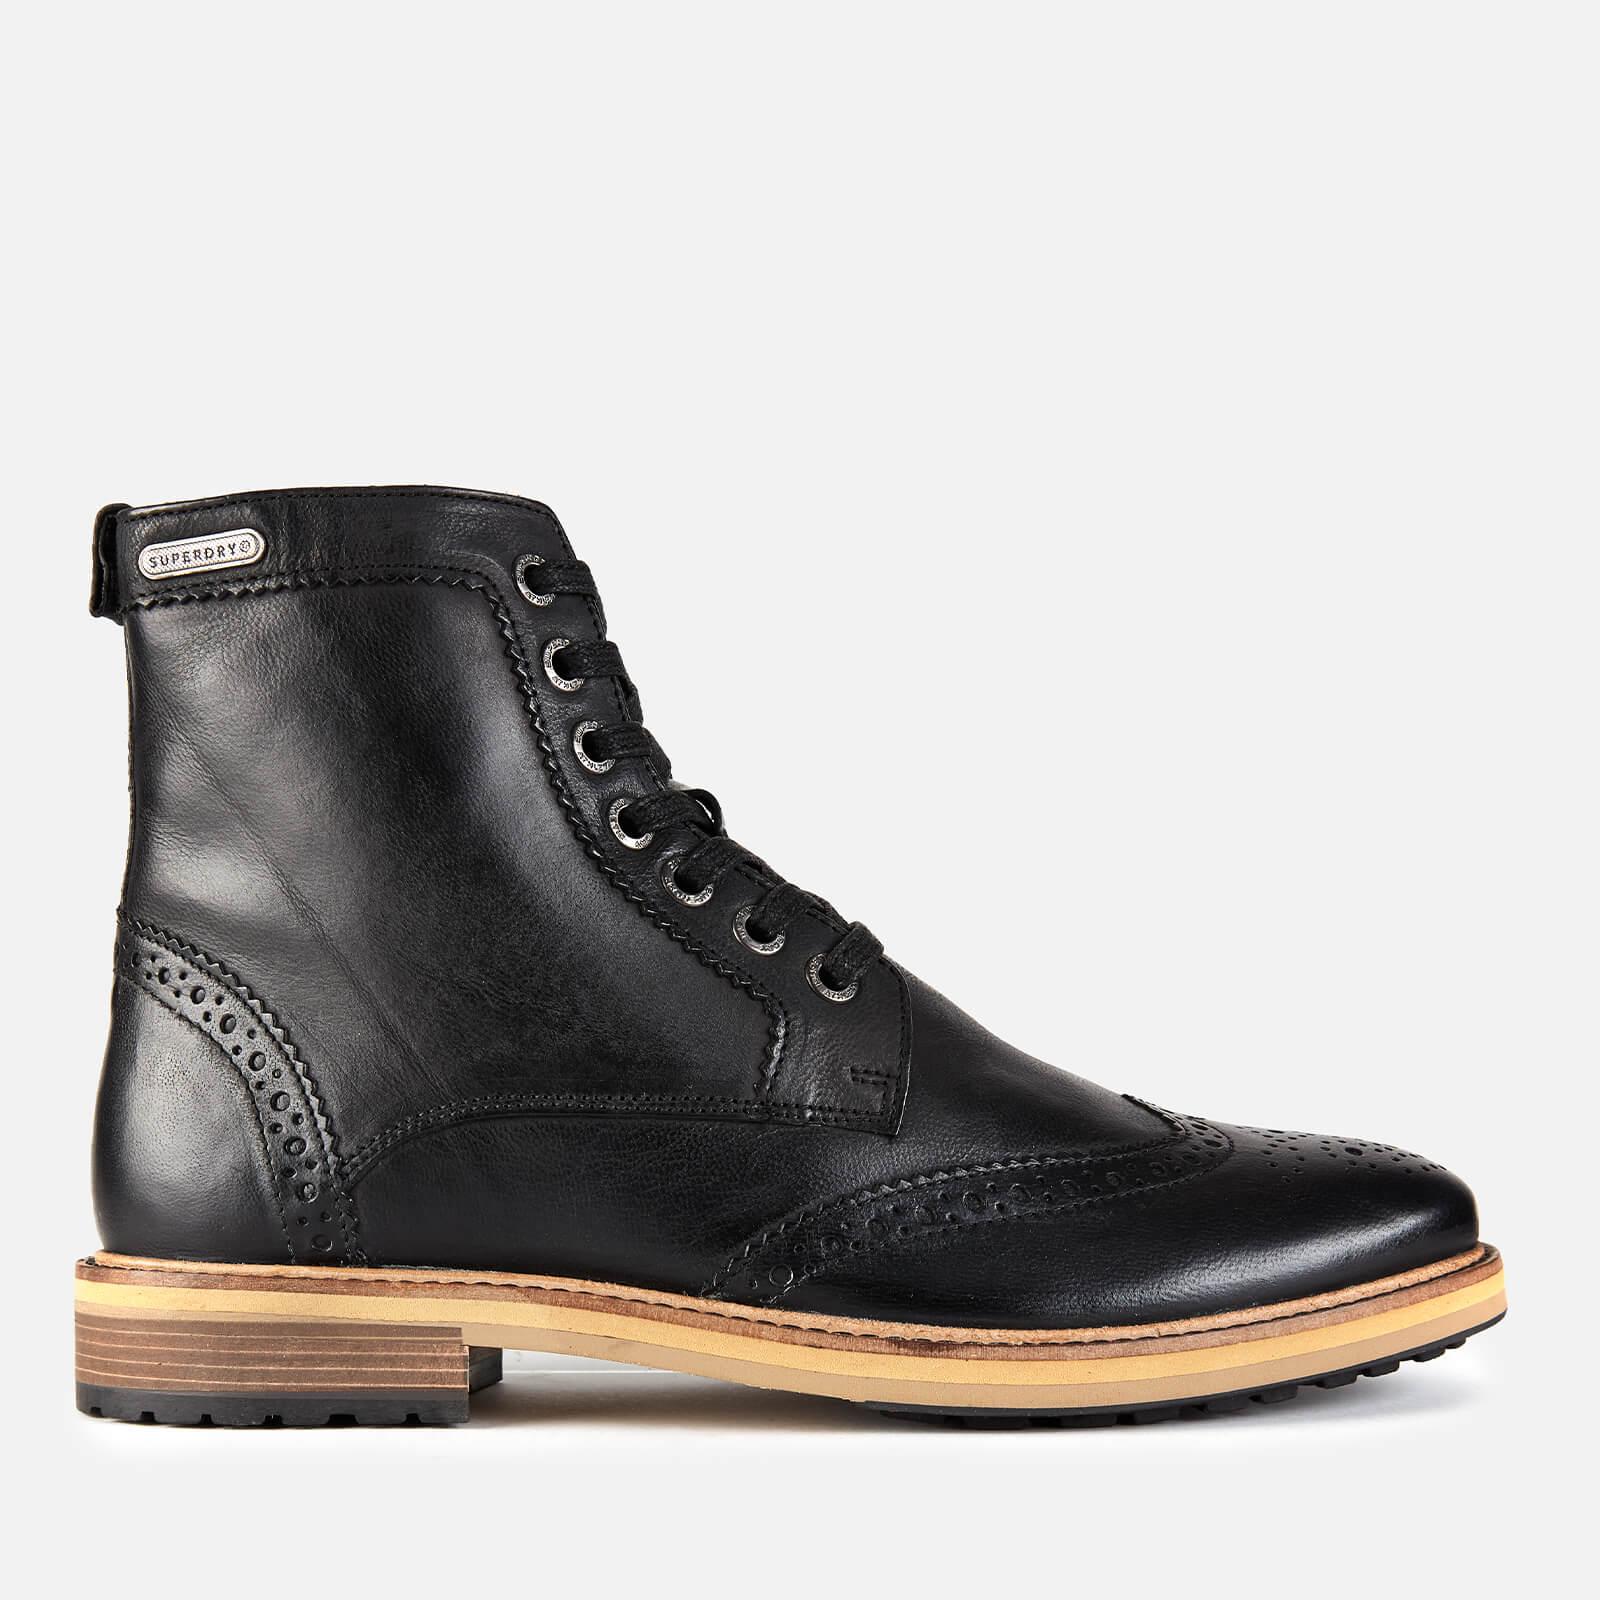 Superdry Shooter Boots in Black for Men - Lyst